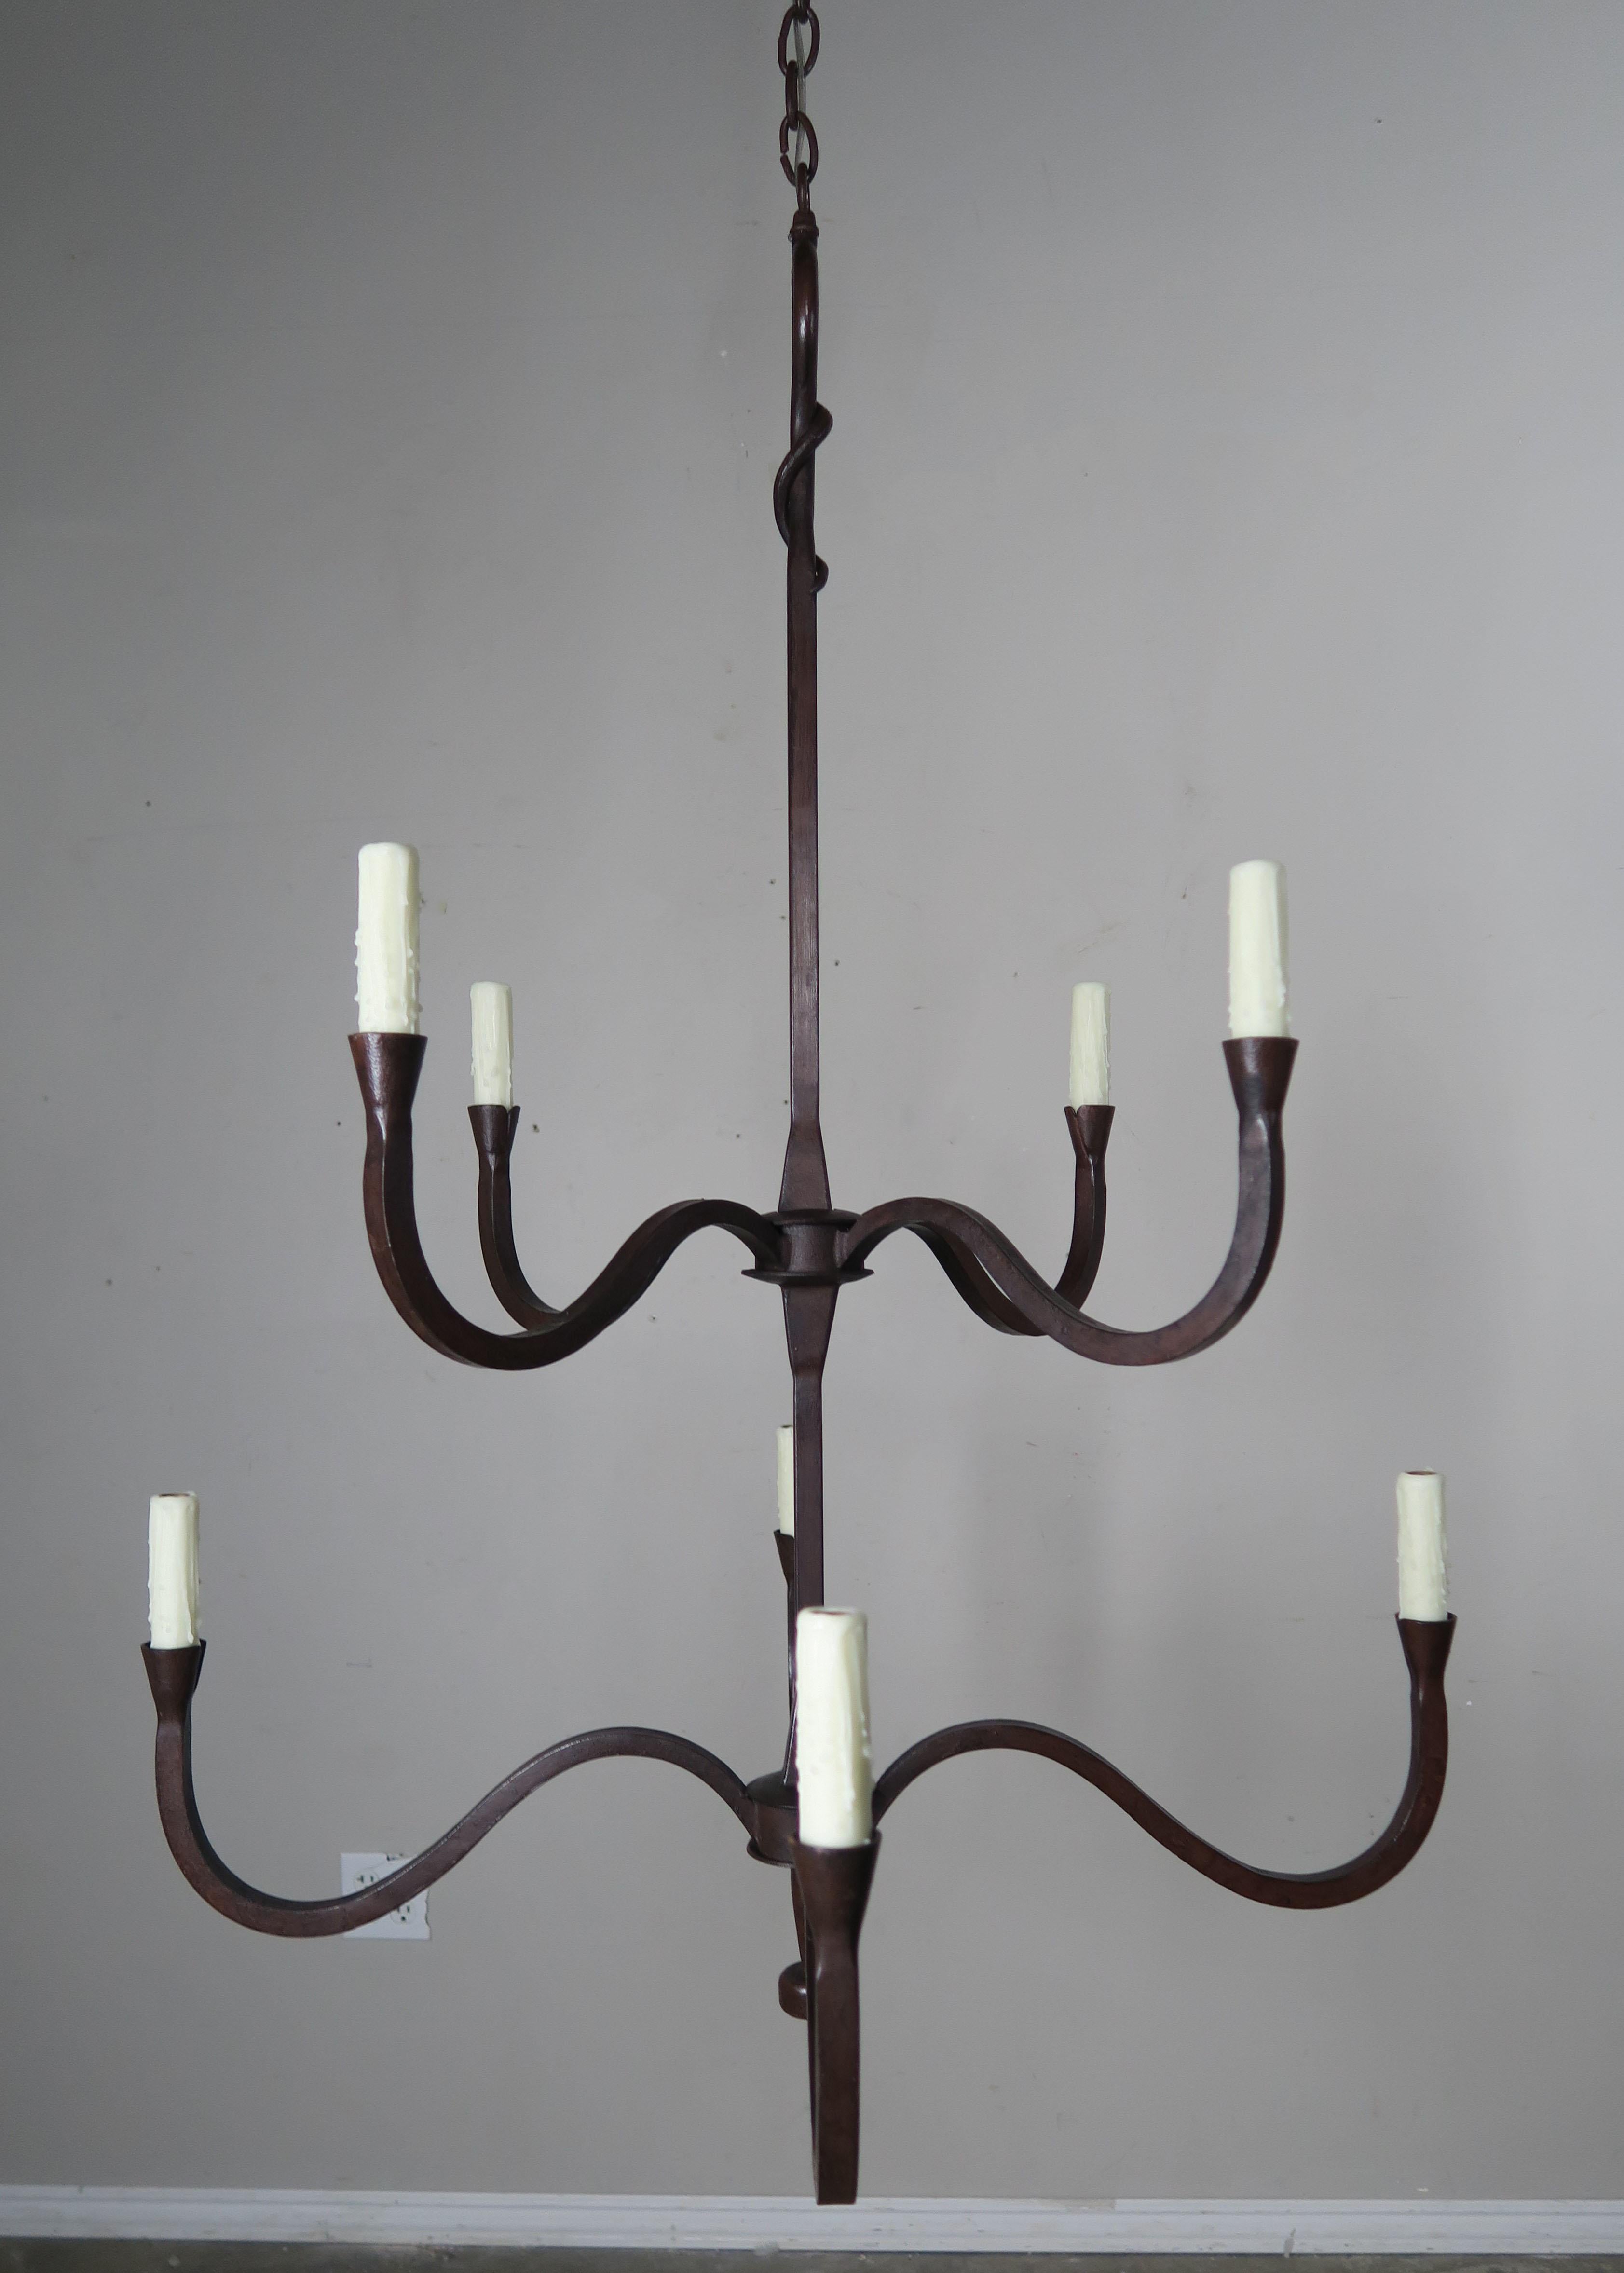 Two-tier eight-light handwrought iron chandelier finished in an antique iron finish. The chandelier is newly wired with cream drip wax candle covers. The chandelier is made in two sizes but any size or custom finish can be done per your